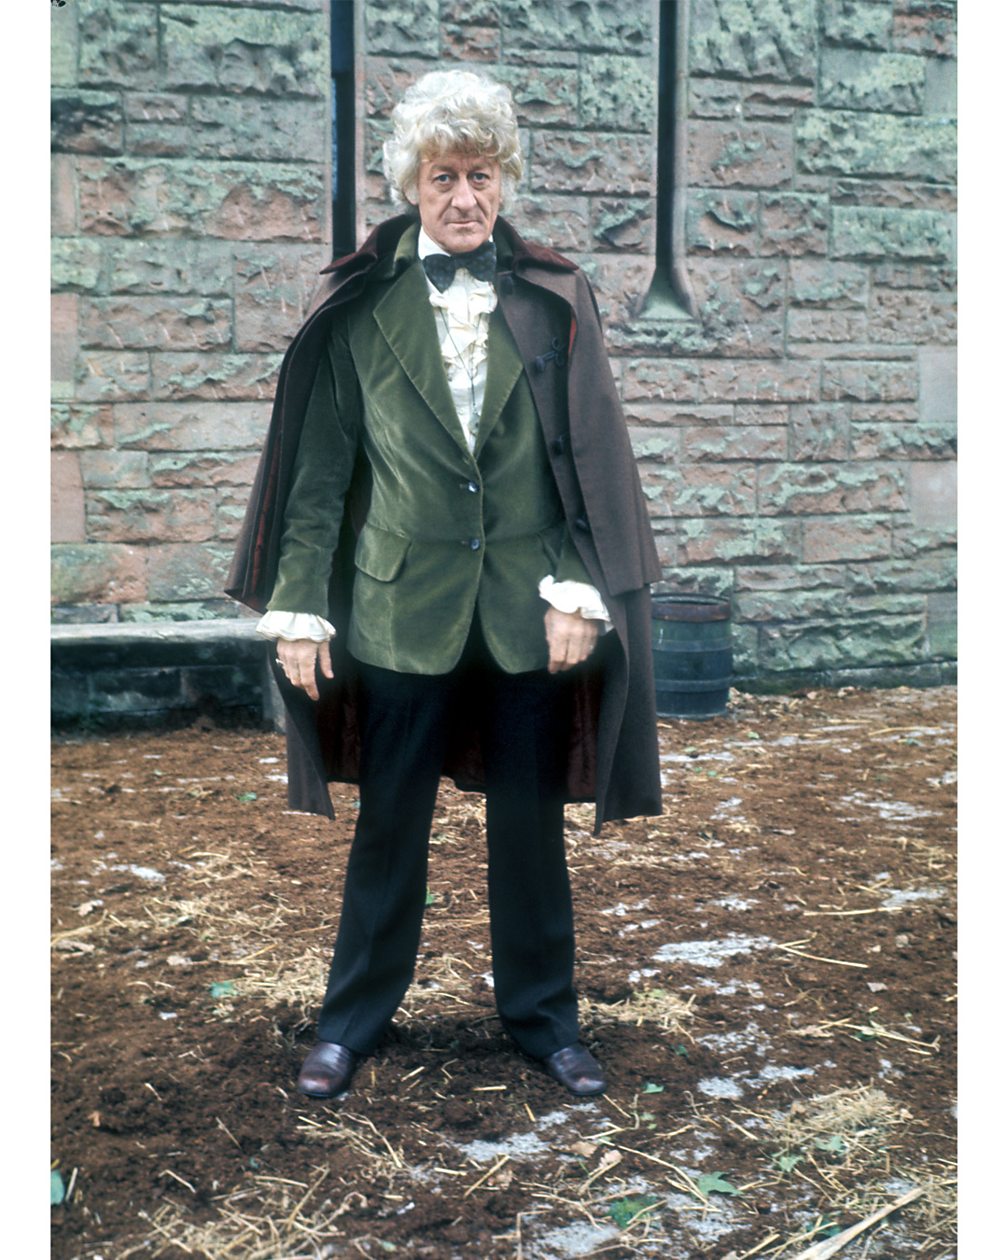 Jon Pertwee's dandyish aesthetic in the early 70s chimed with the retro fashions of the time (Credit: BBC)